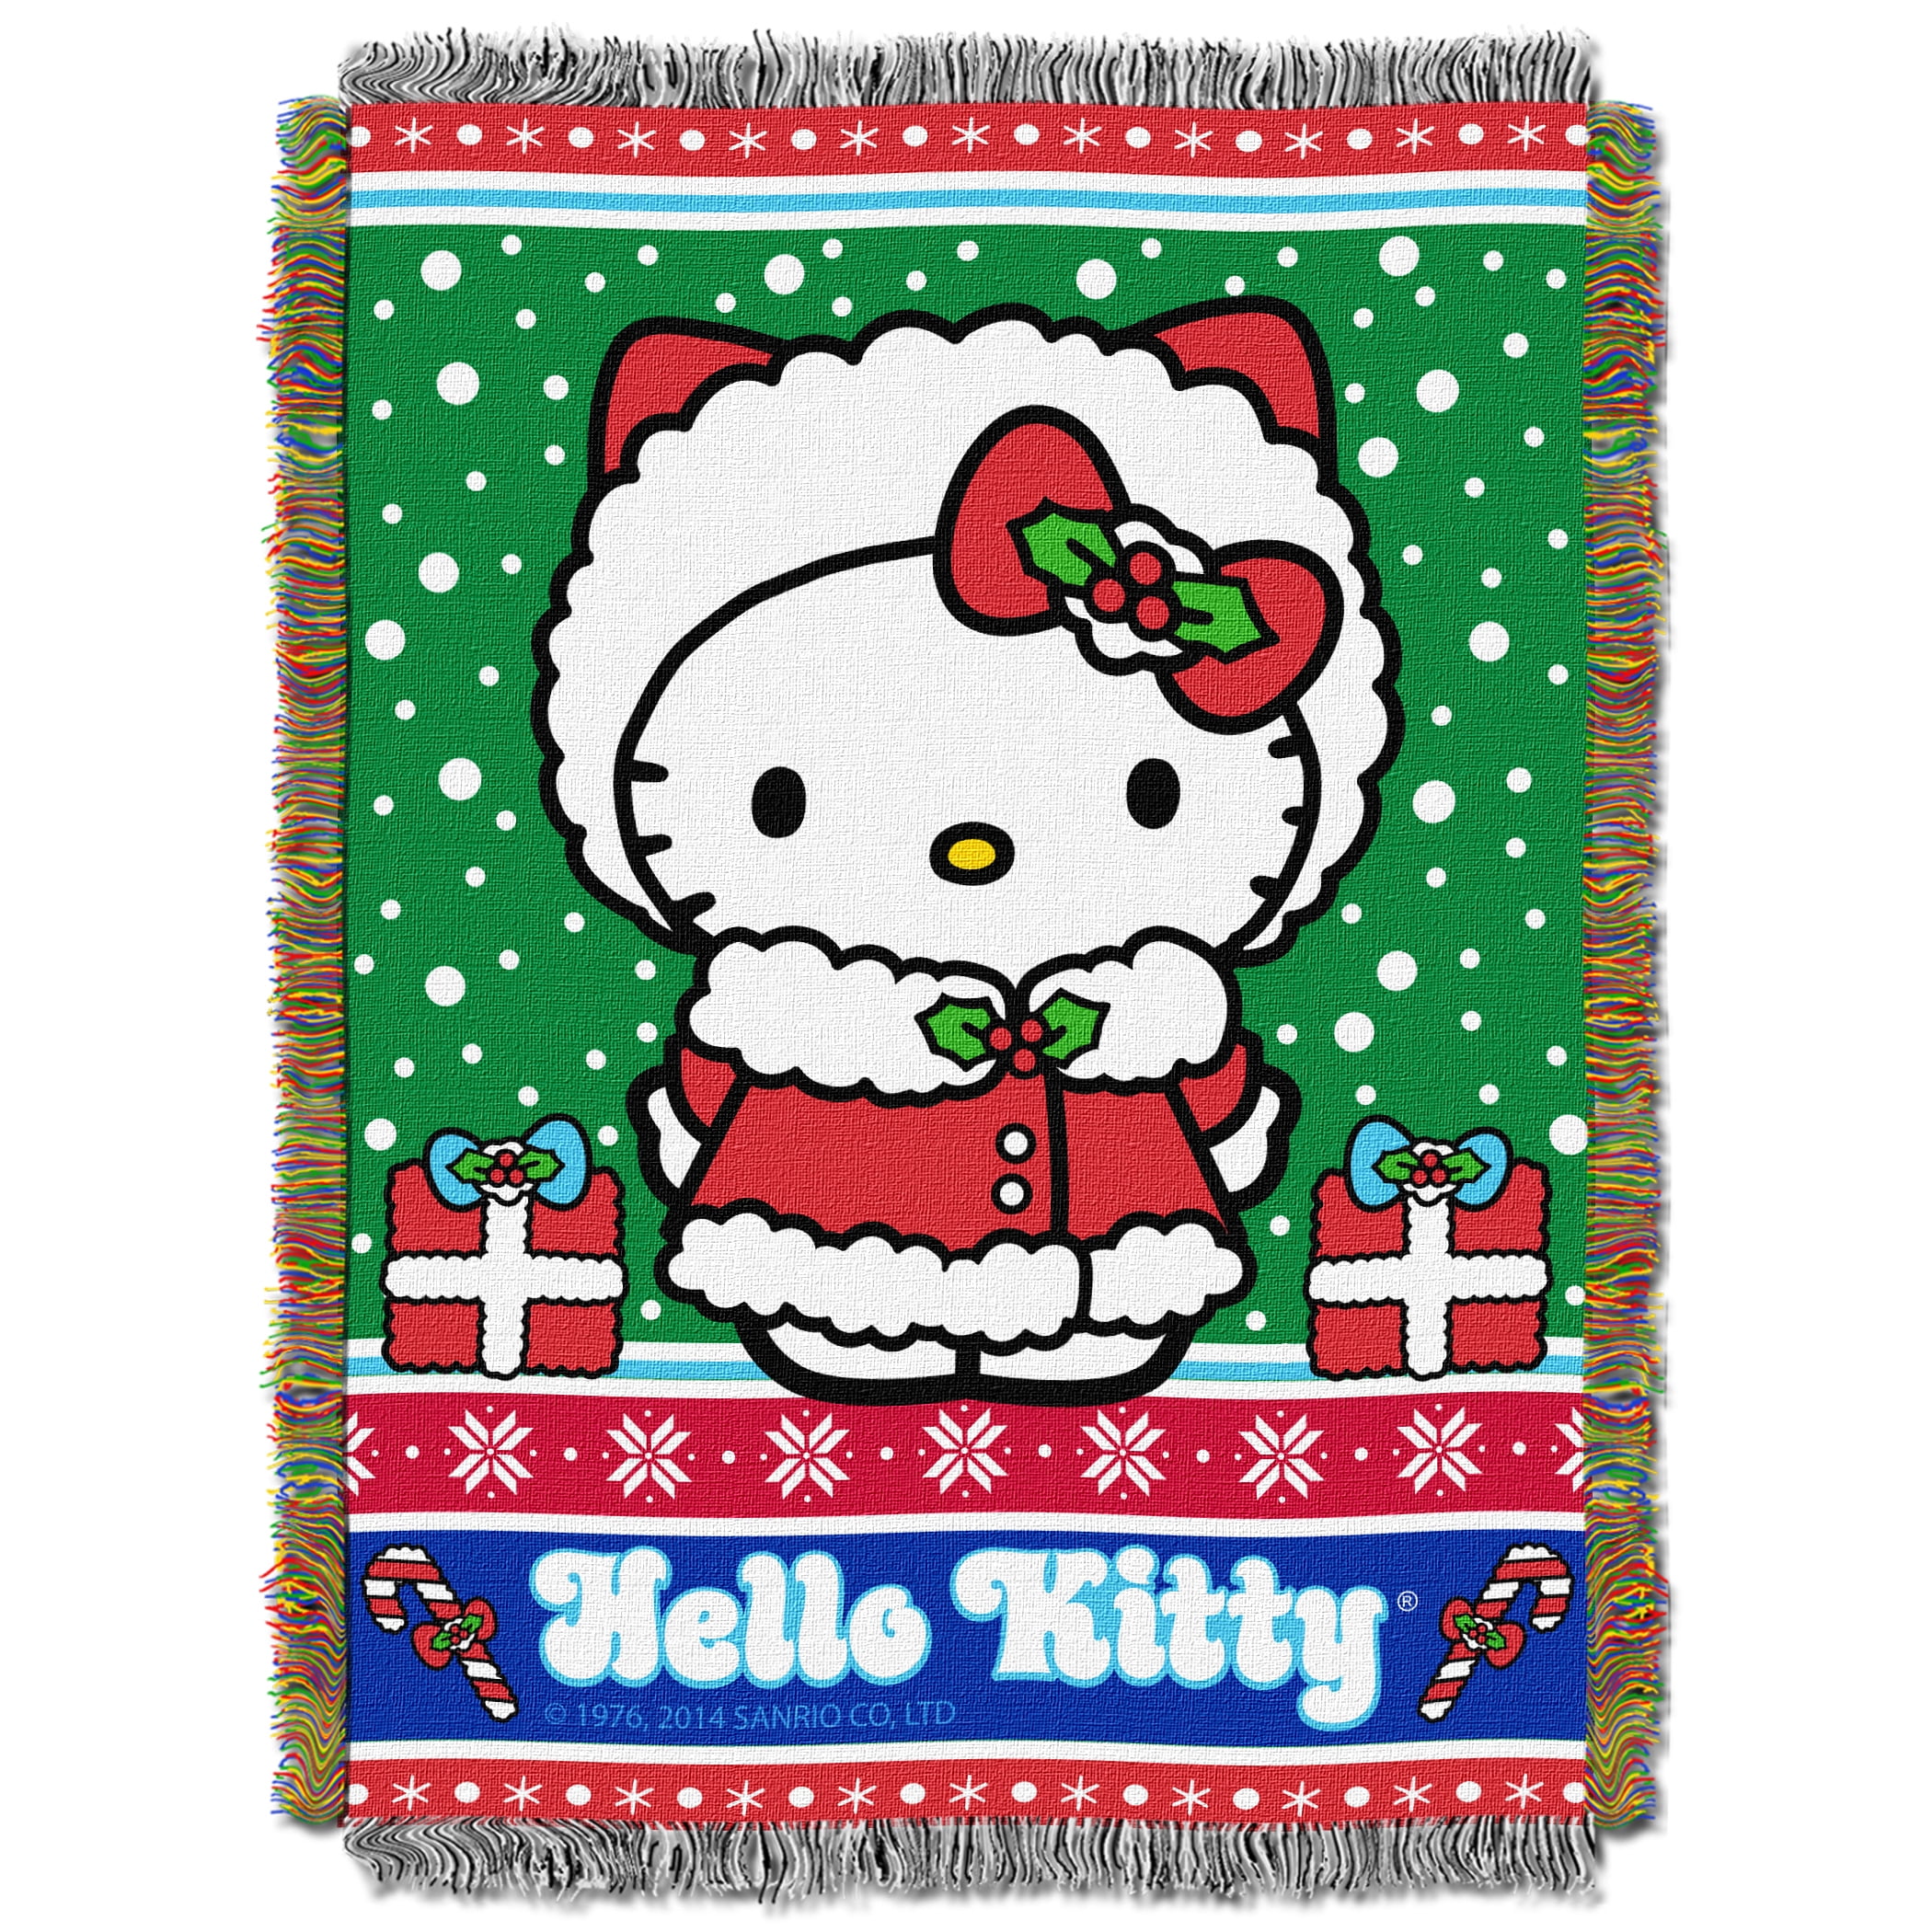 Northwest Hello Kitty Woven Tapestry Throw Blanket, 48 x 60, Cute Game